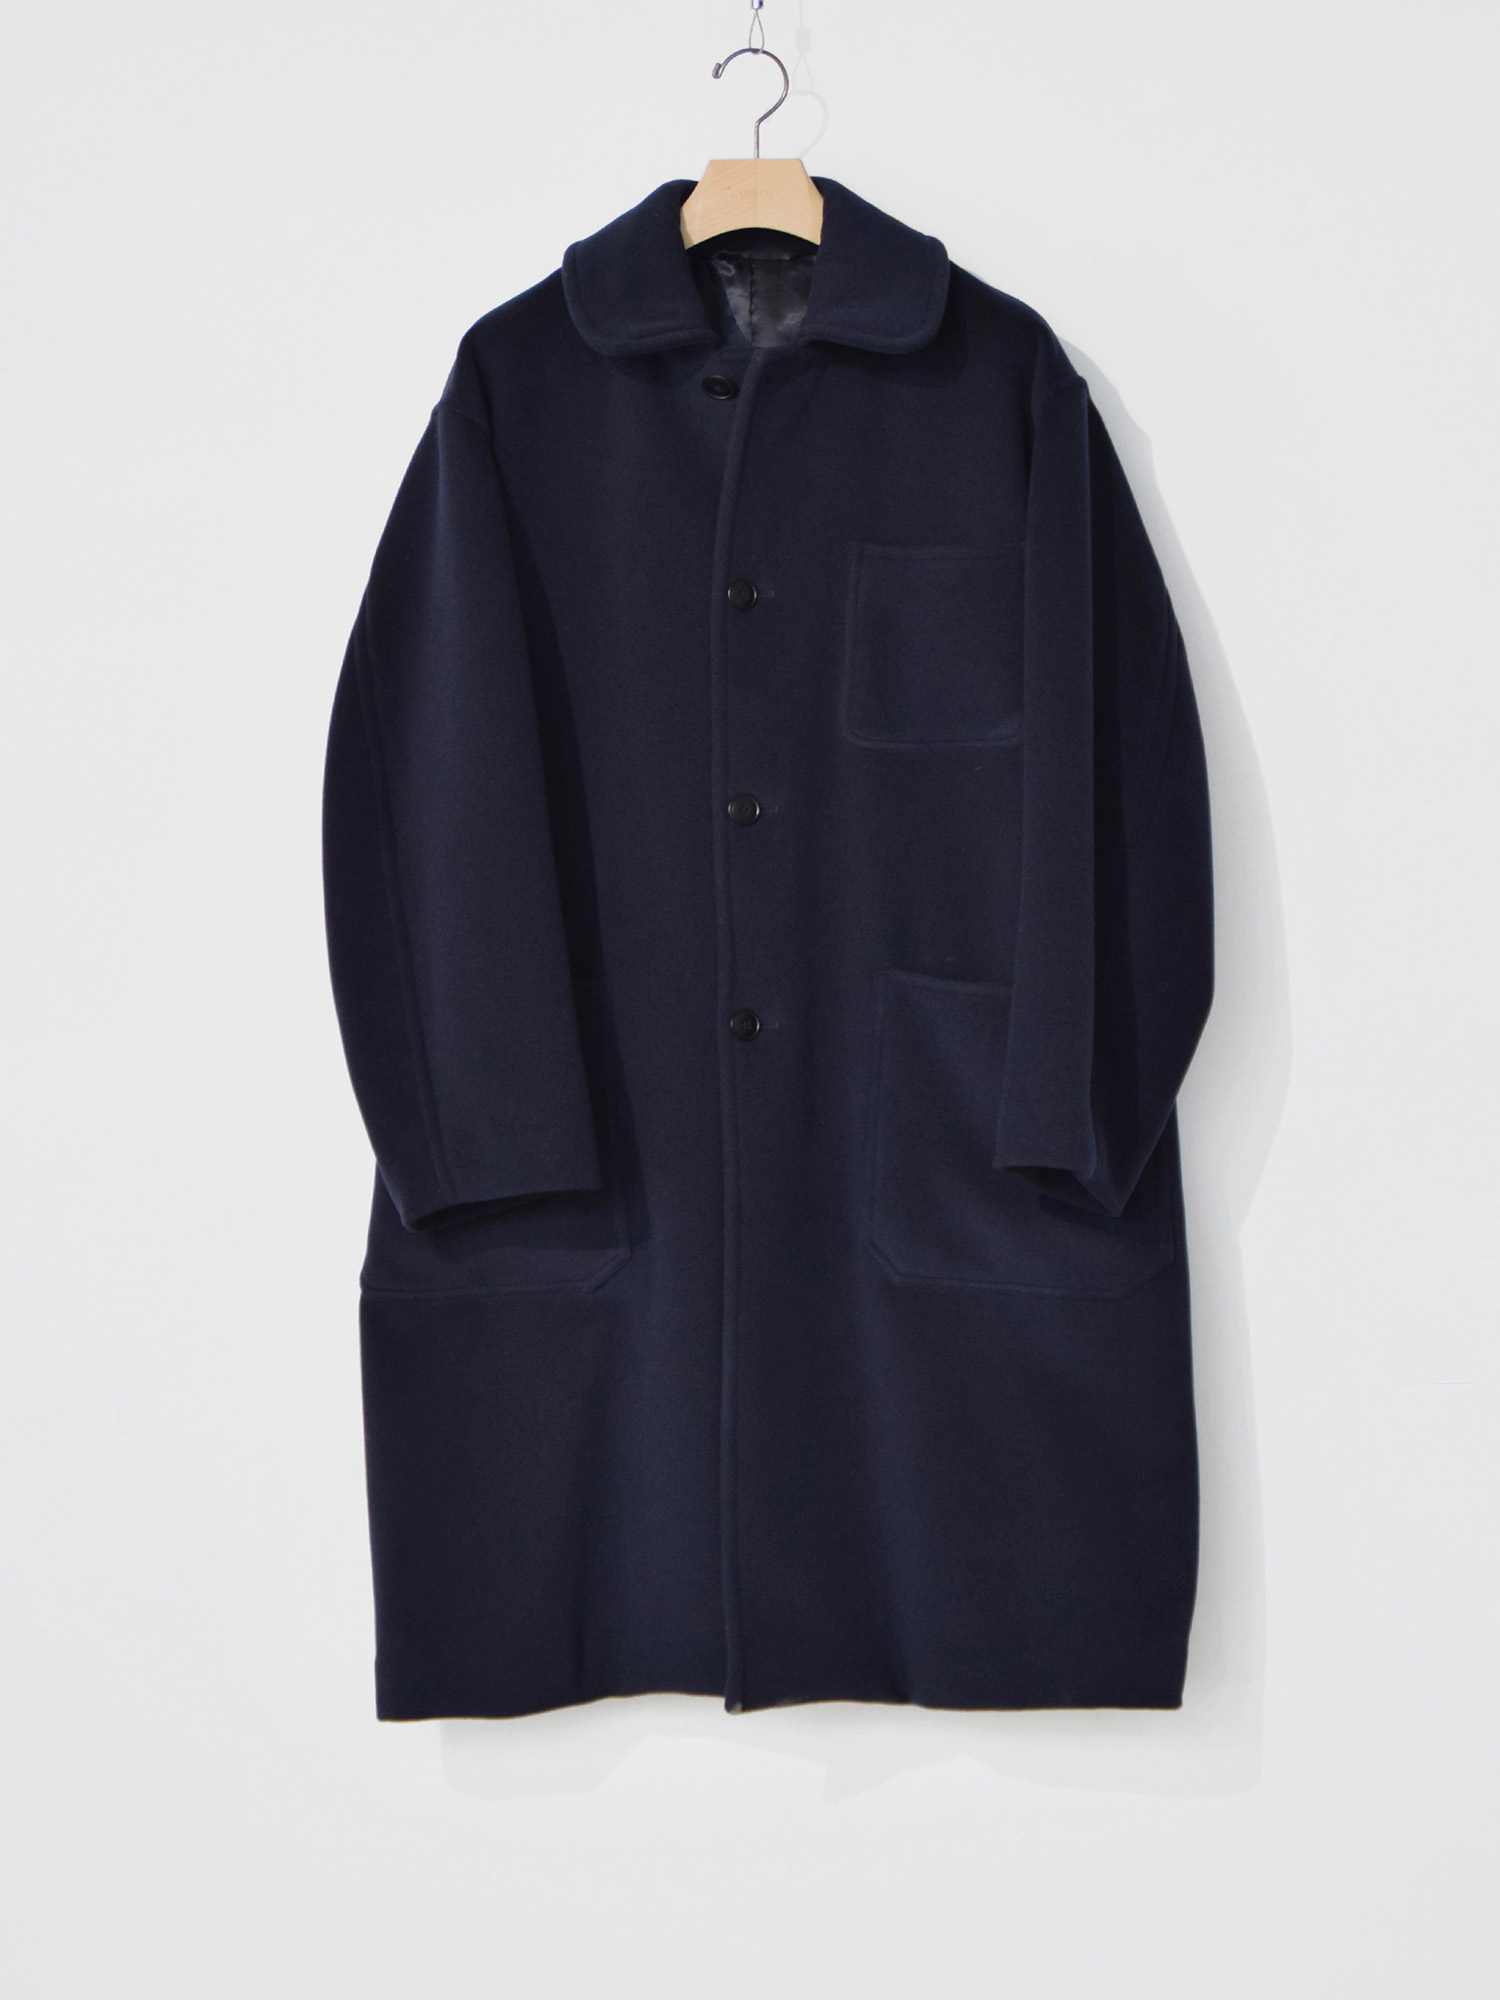 COMOLI” 6th Delivery 22aw Collection｜Journal｜BARD